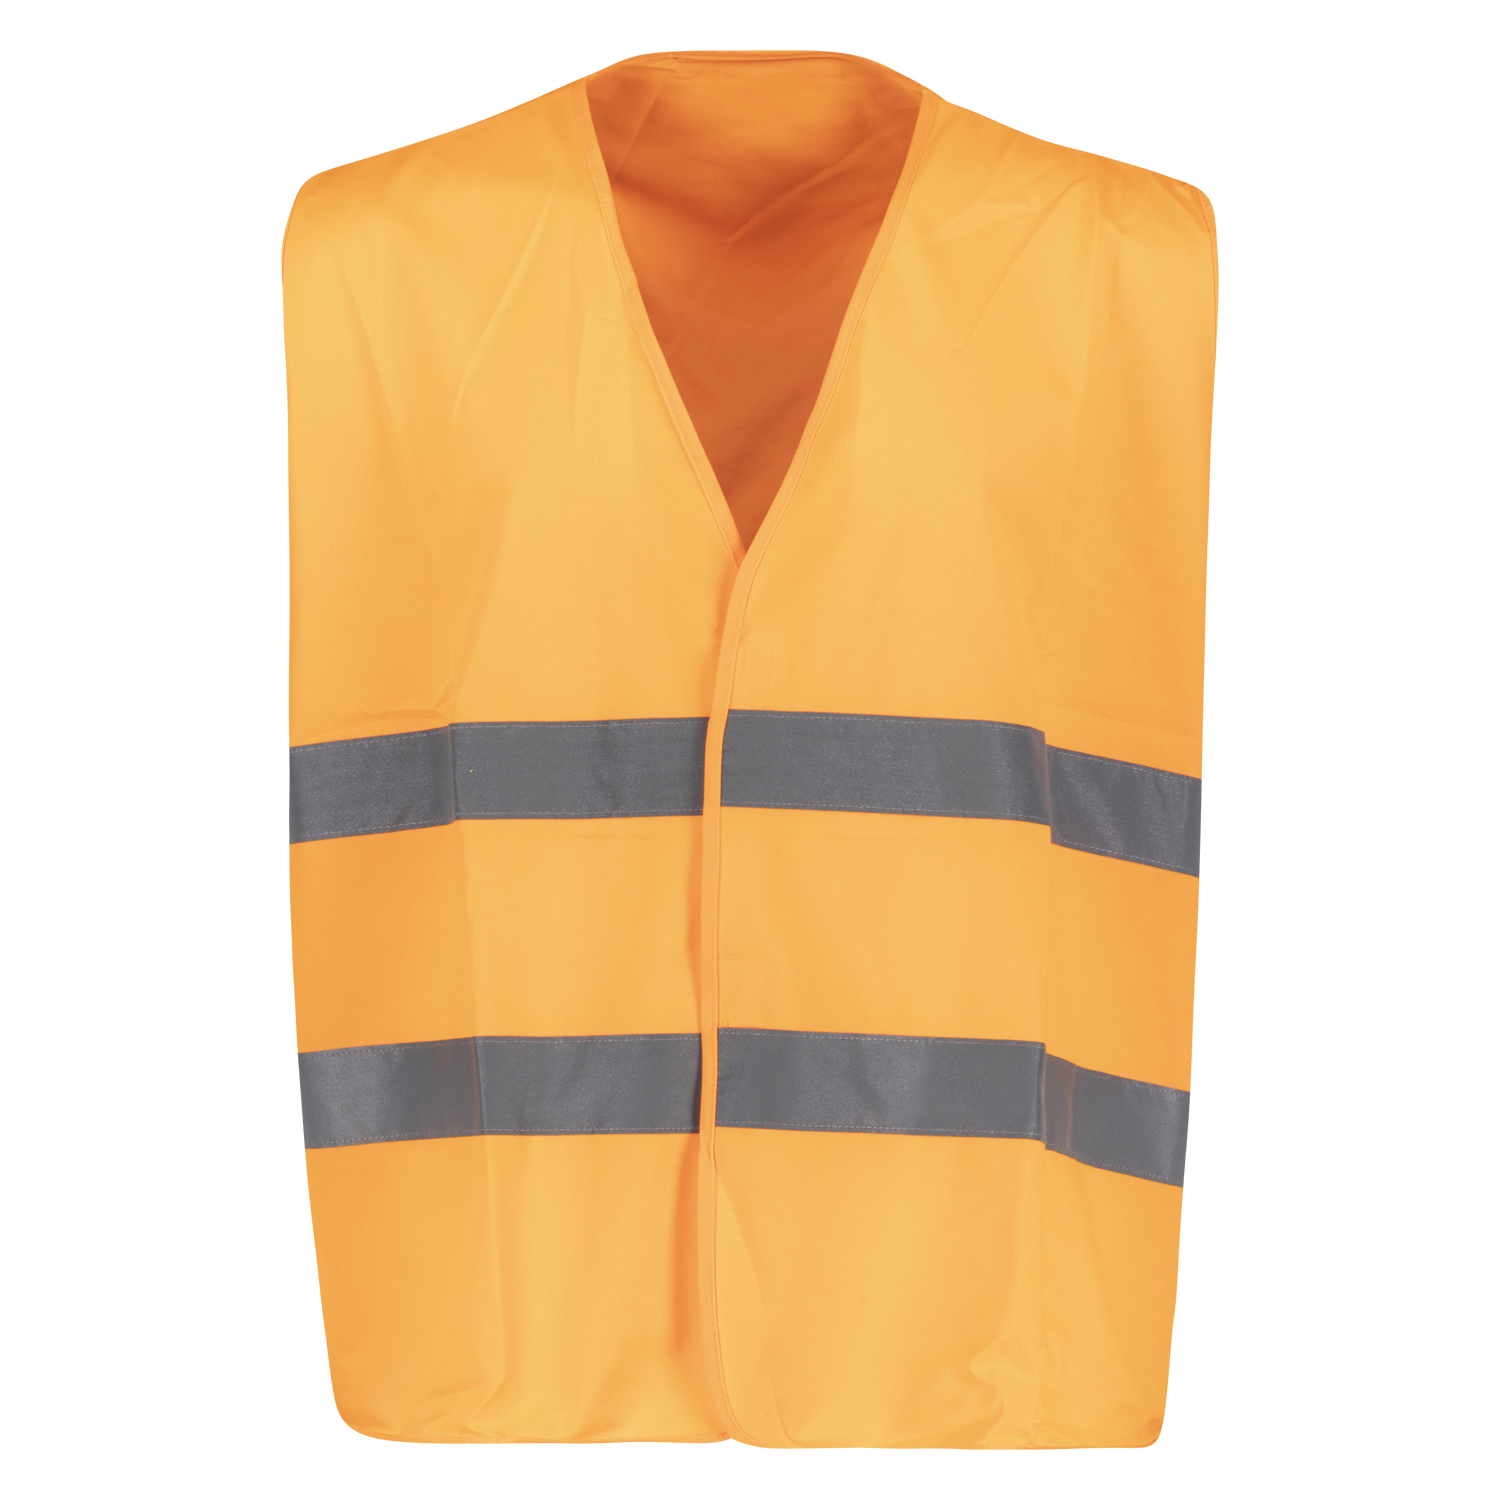 Warning vest in orange by Marc&Mark in oversizes up to 10XL